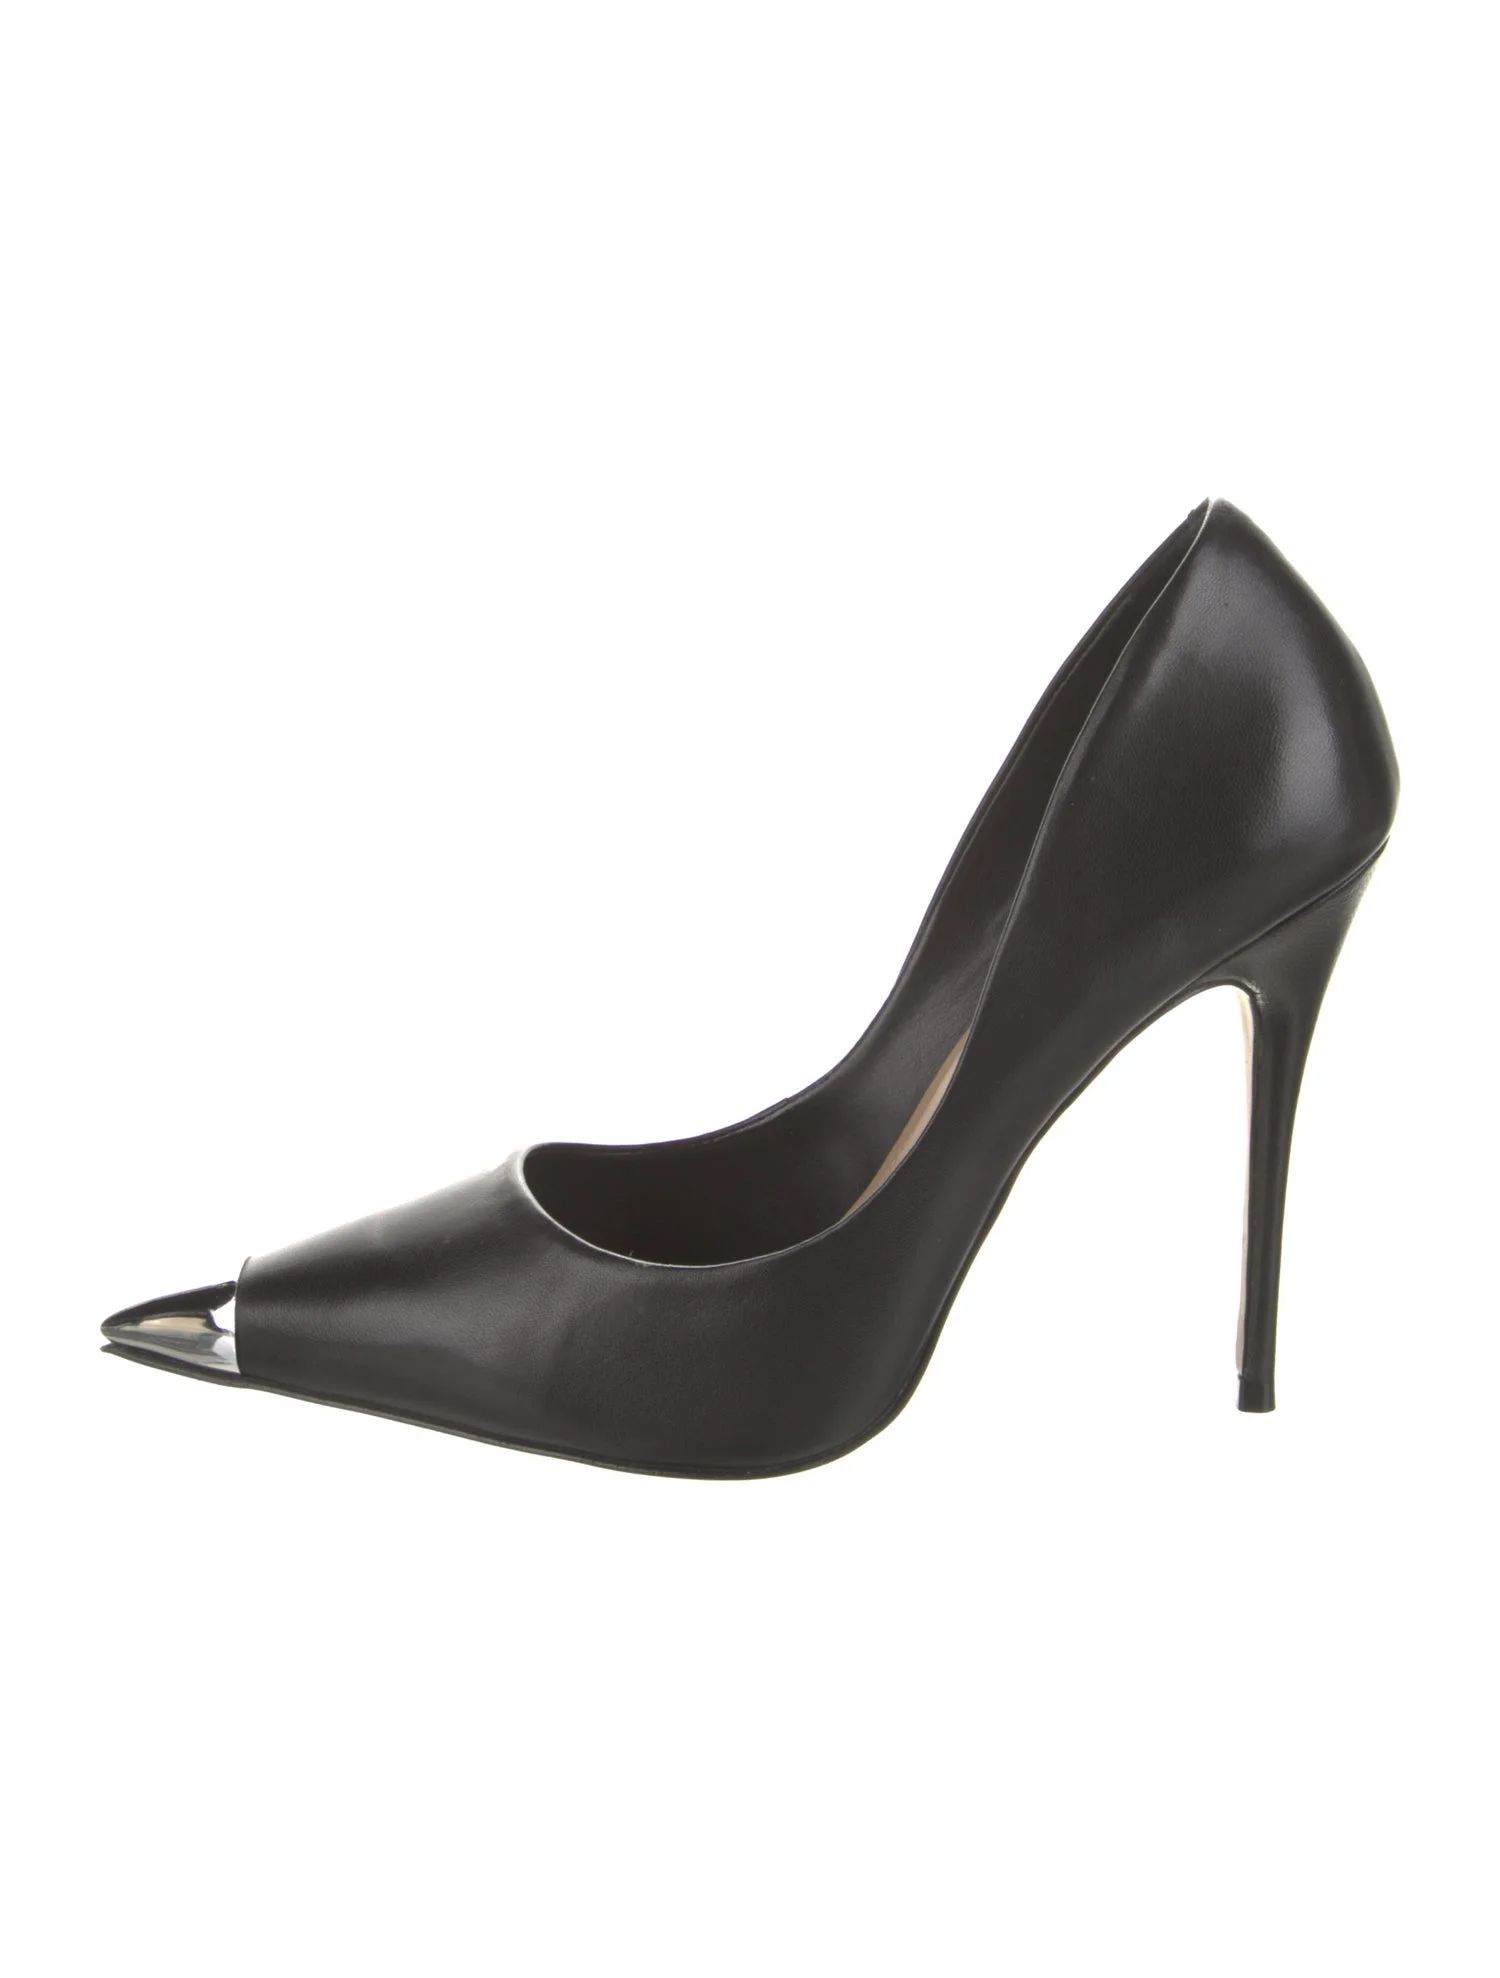 Saks Fifth Avenue Leather Pumps | The RealReal